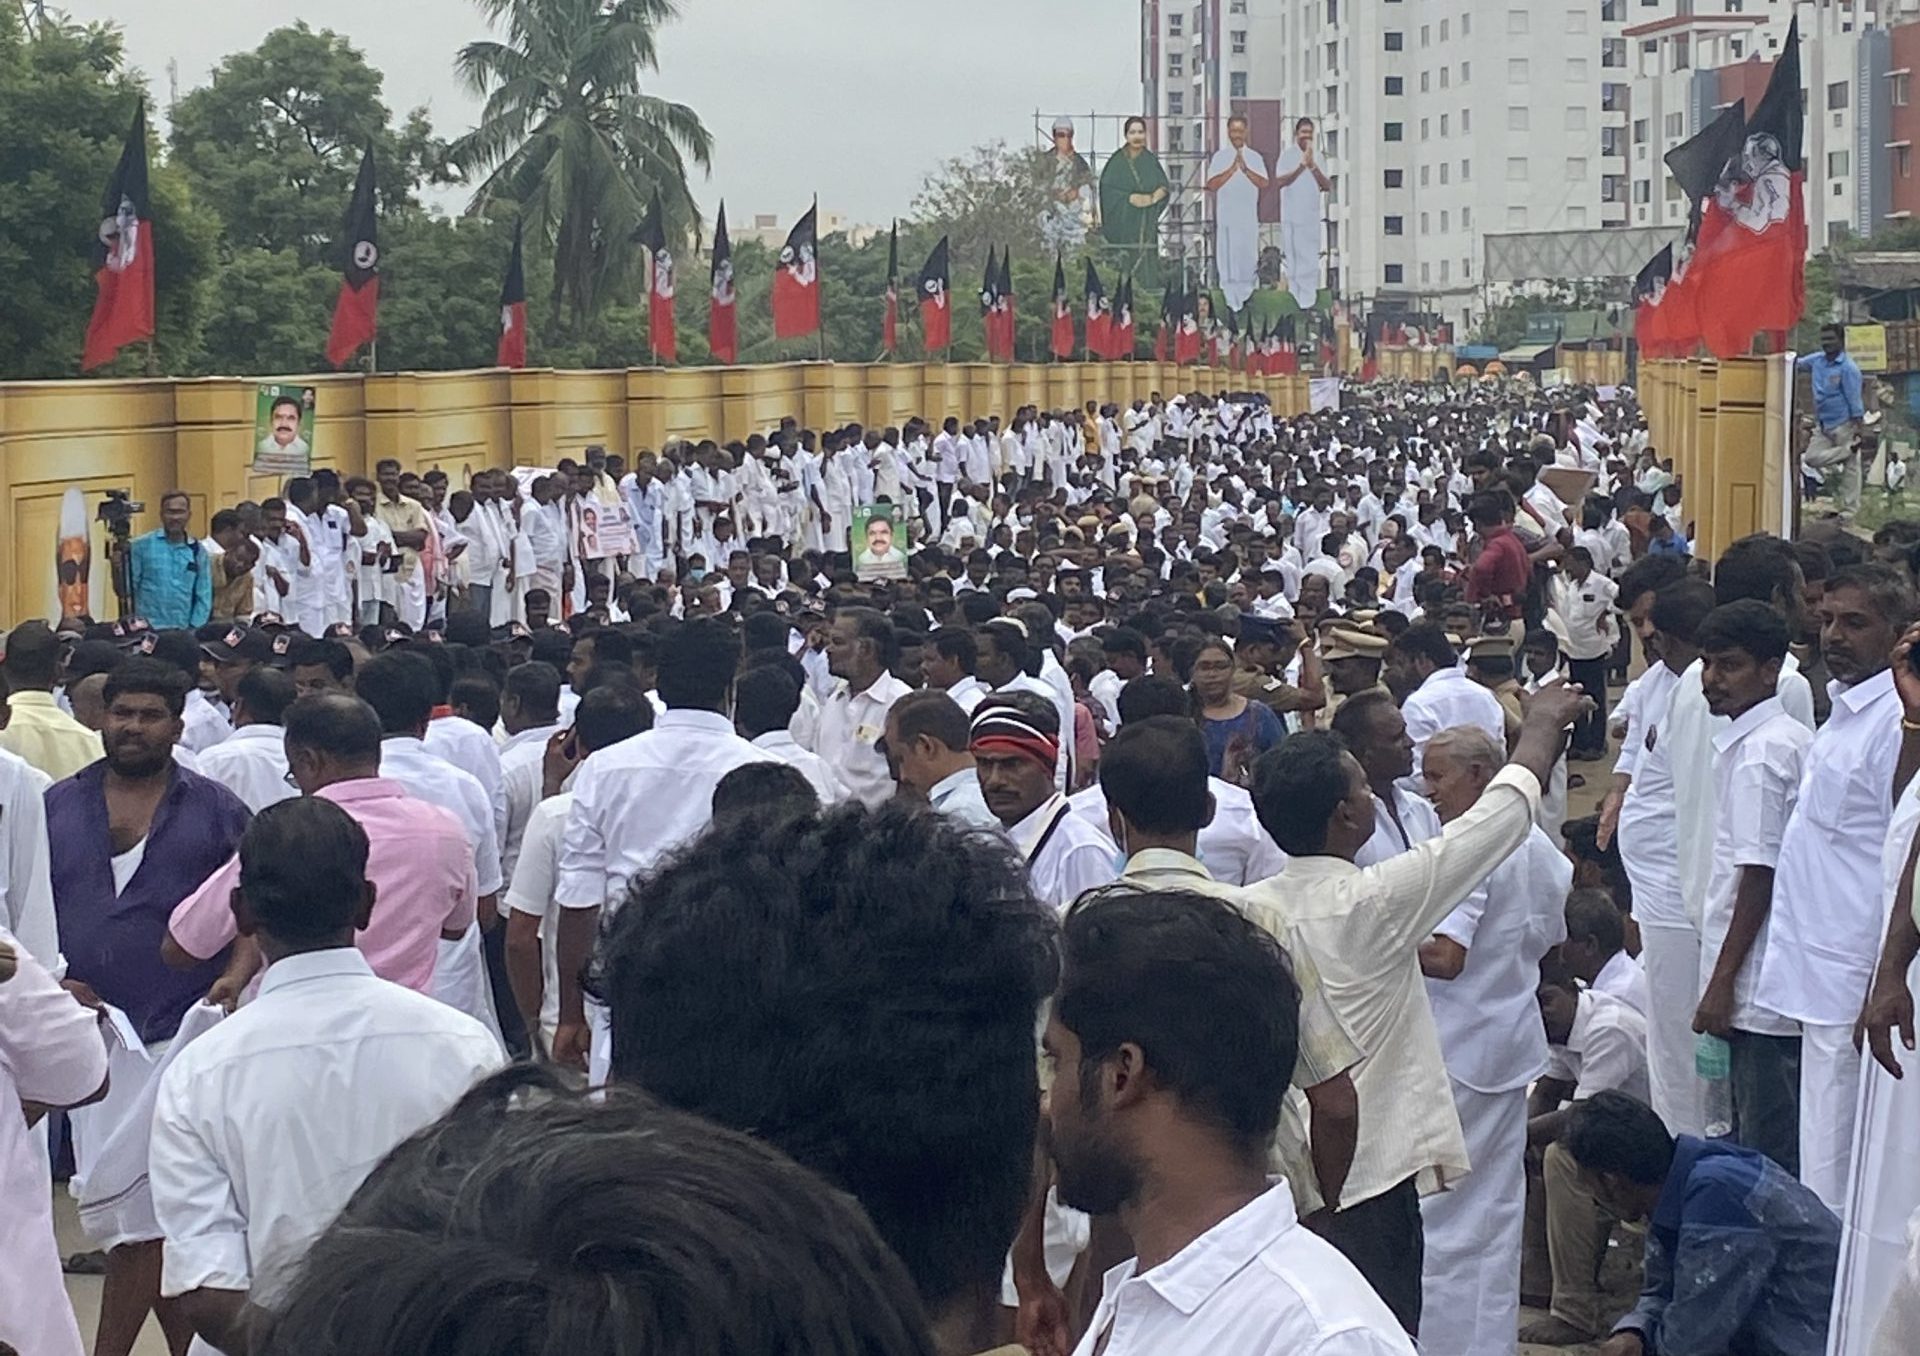 AIADMK supporters gathered at the entrance of the private marriage hall where the general council meeting was held